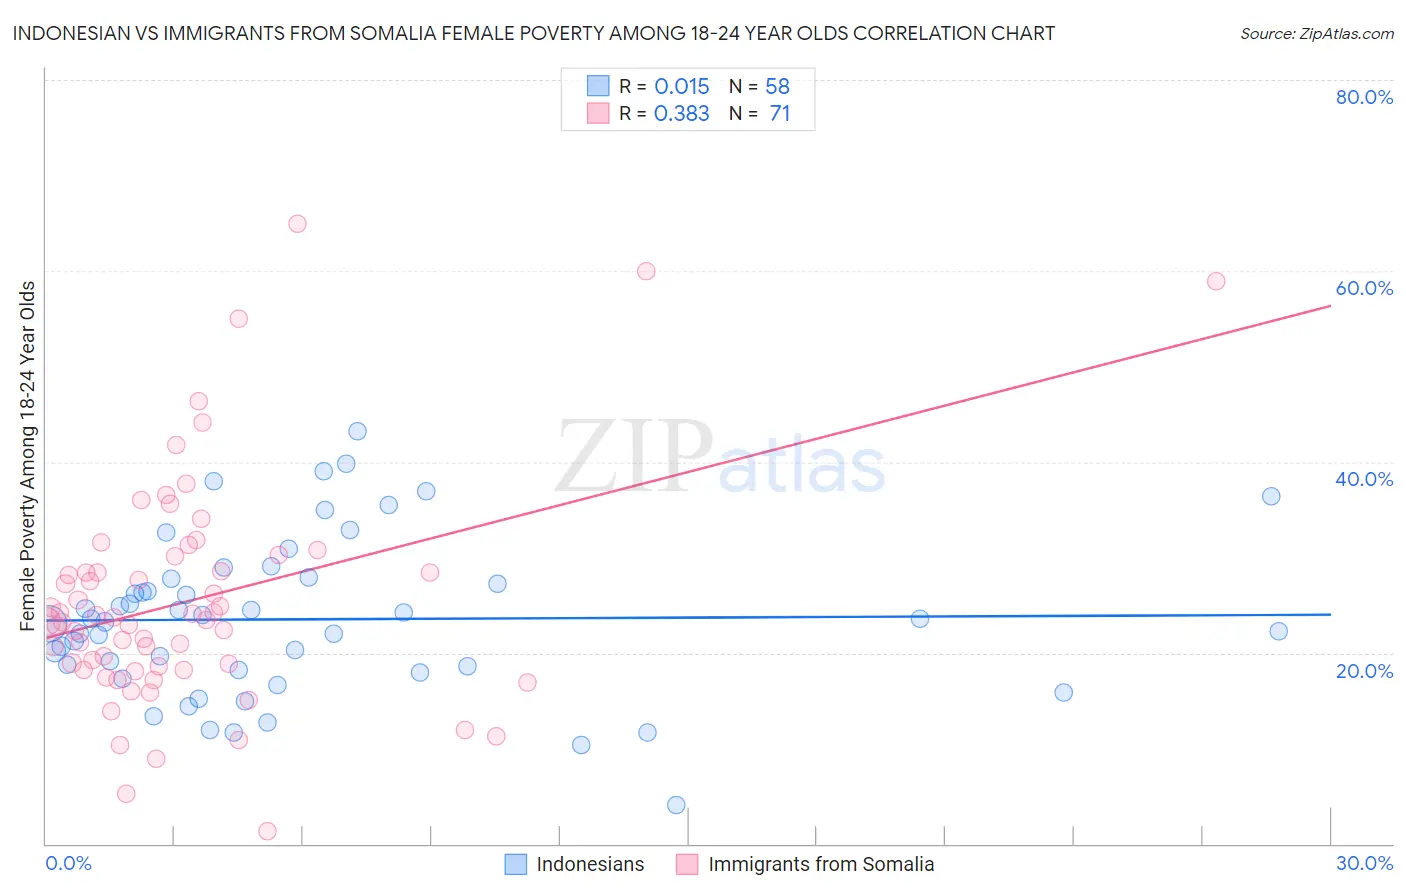 Indonesian vs Immigrants from Somalia Female Poverty Among 18-24 Year Olds